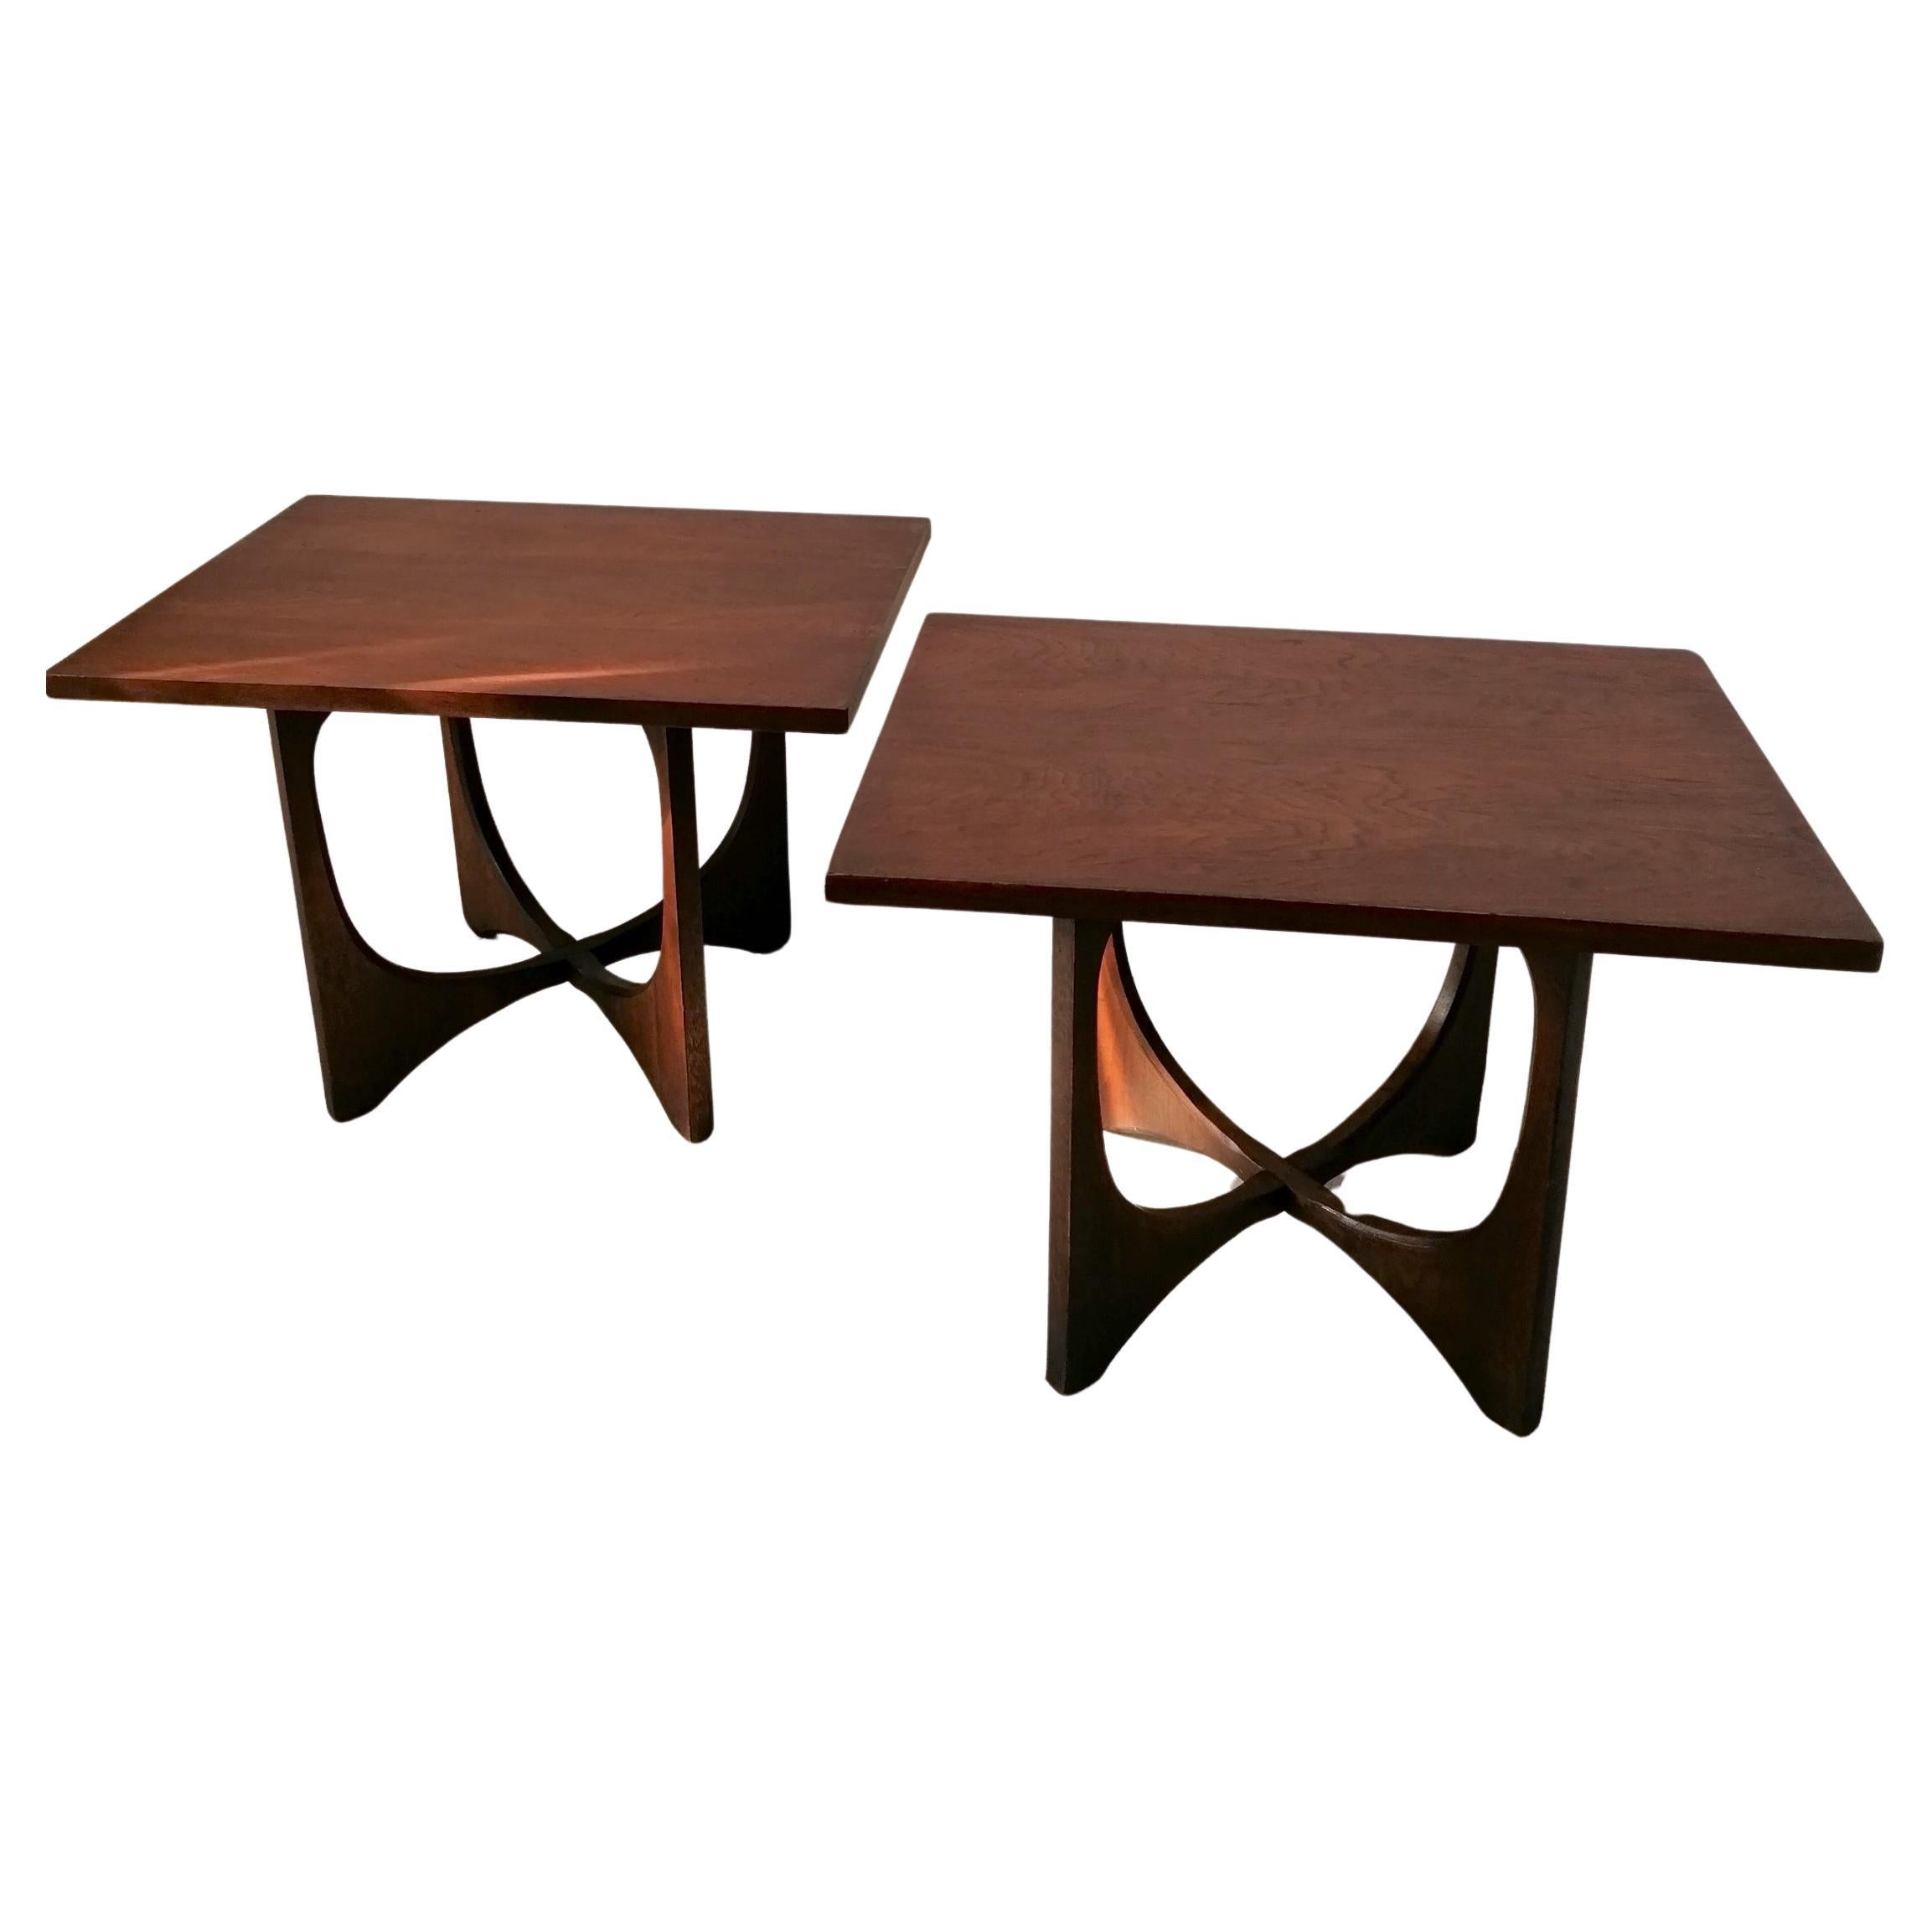 Pair of classic midcentury Broyhill Brasilia walnut side / end tables, USA 1960s